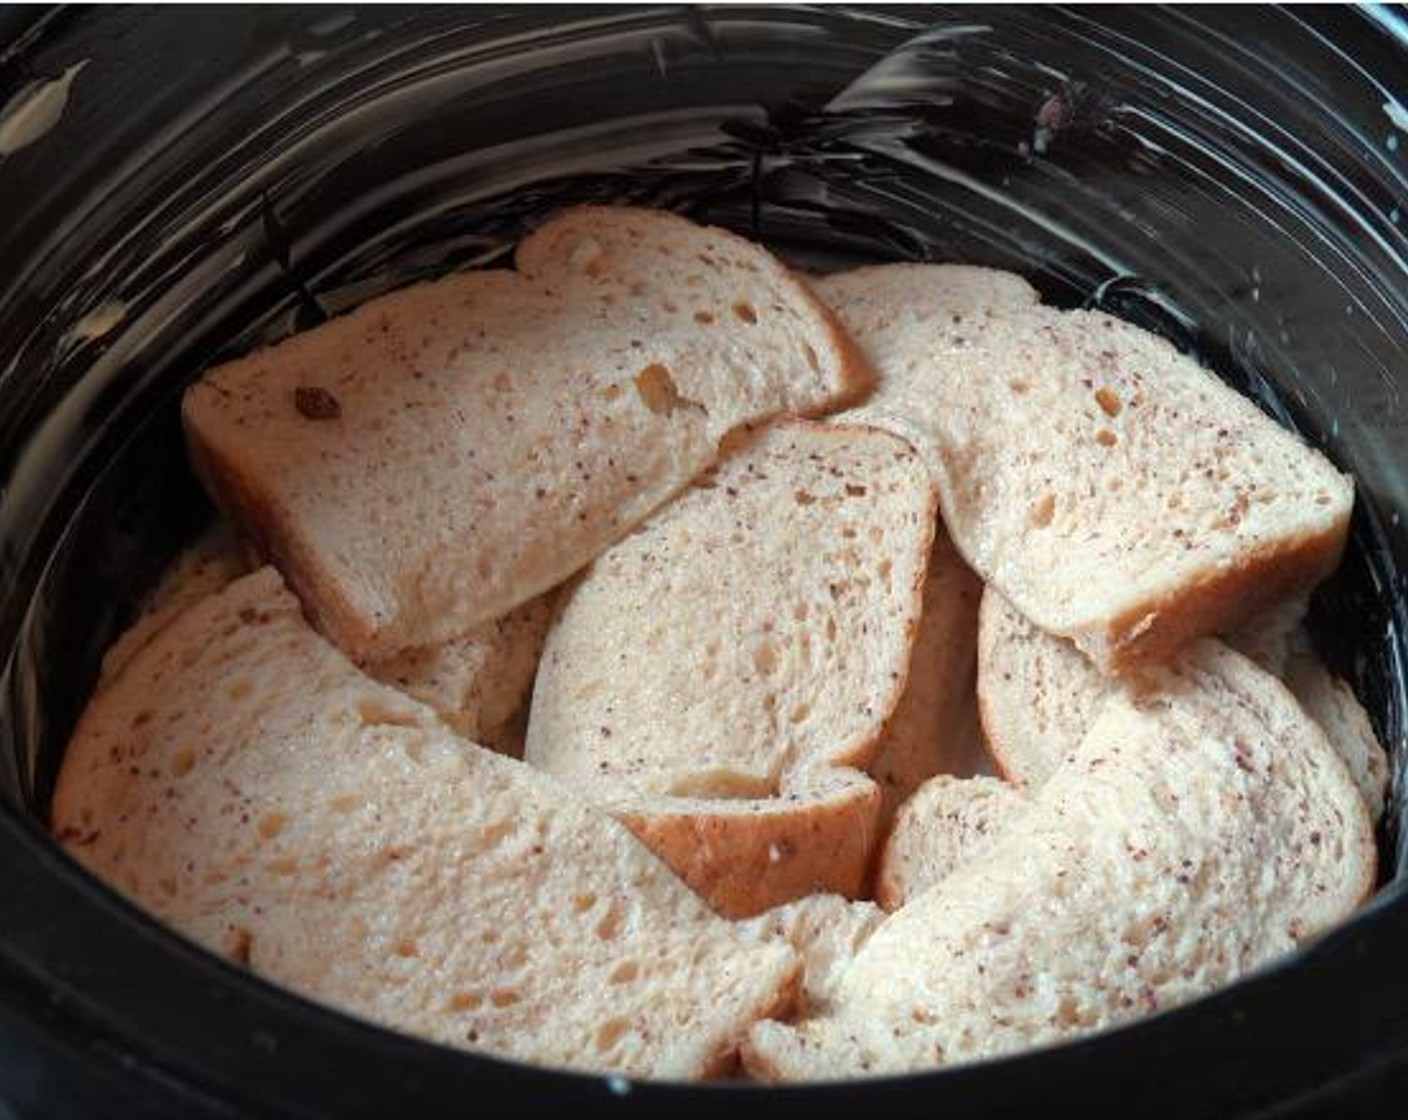 step 3 Dip each individual slice of White Sandwich Bread (1/2 pckg) into the egg mixture and then arrange it into the base of the slow cooker. Pour leftover egg mixture over the top.